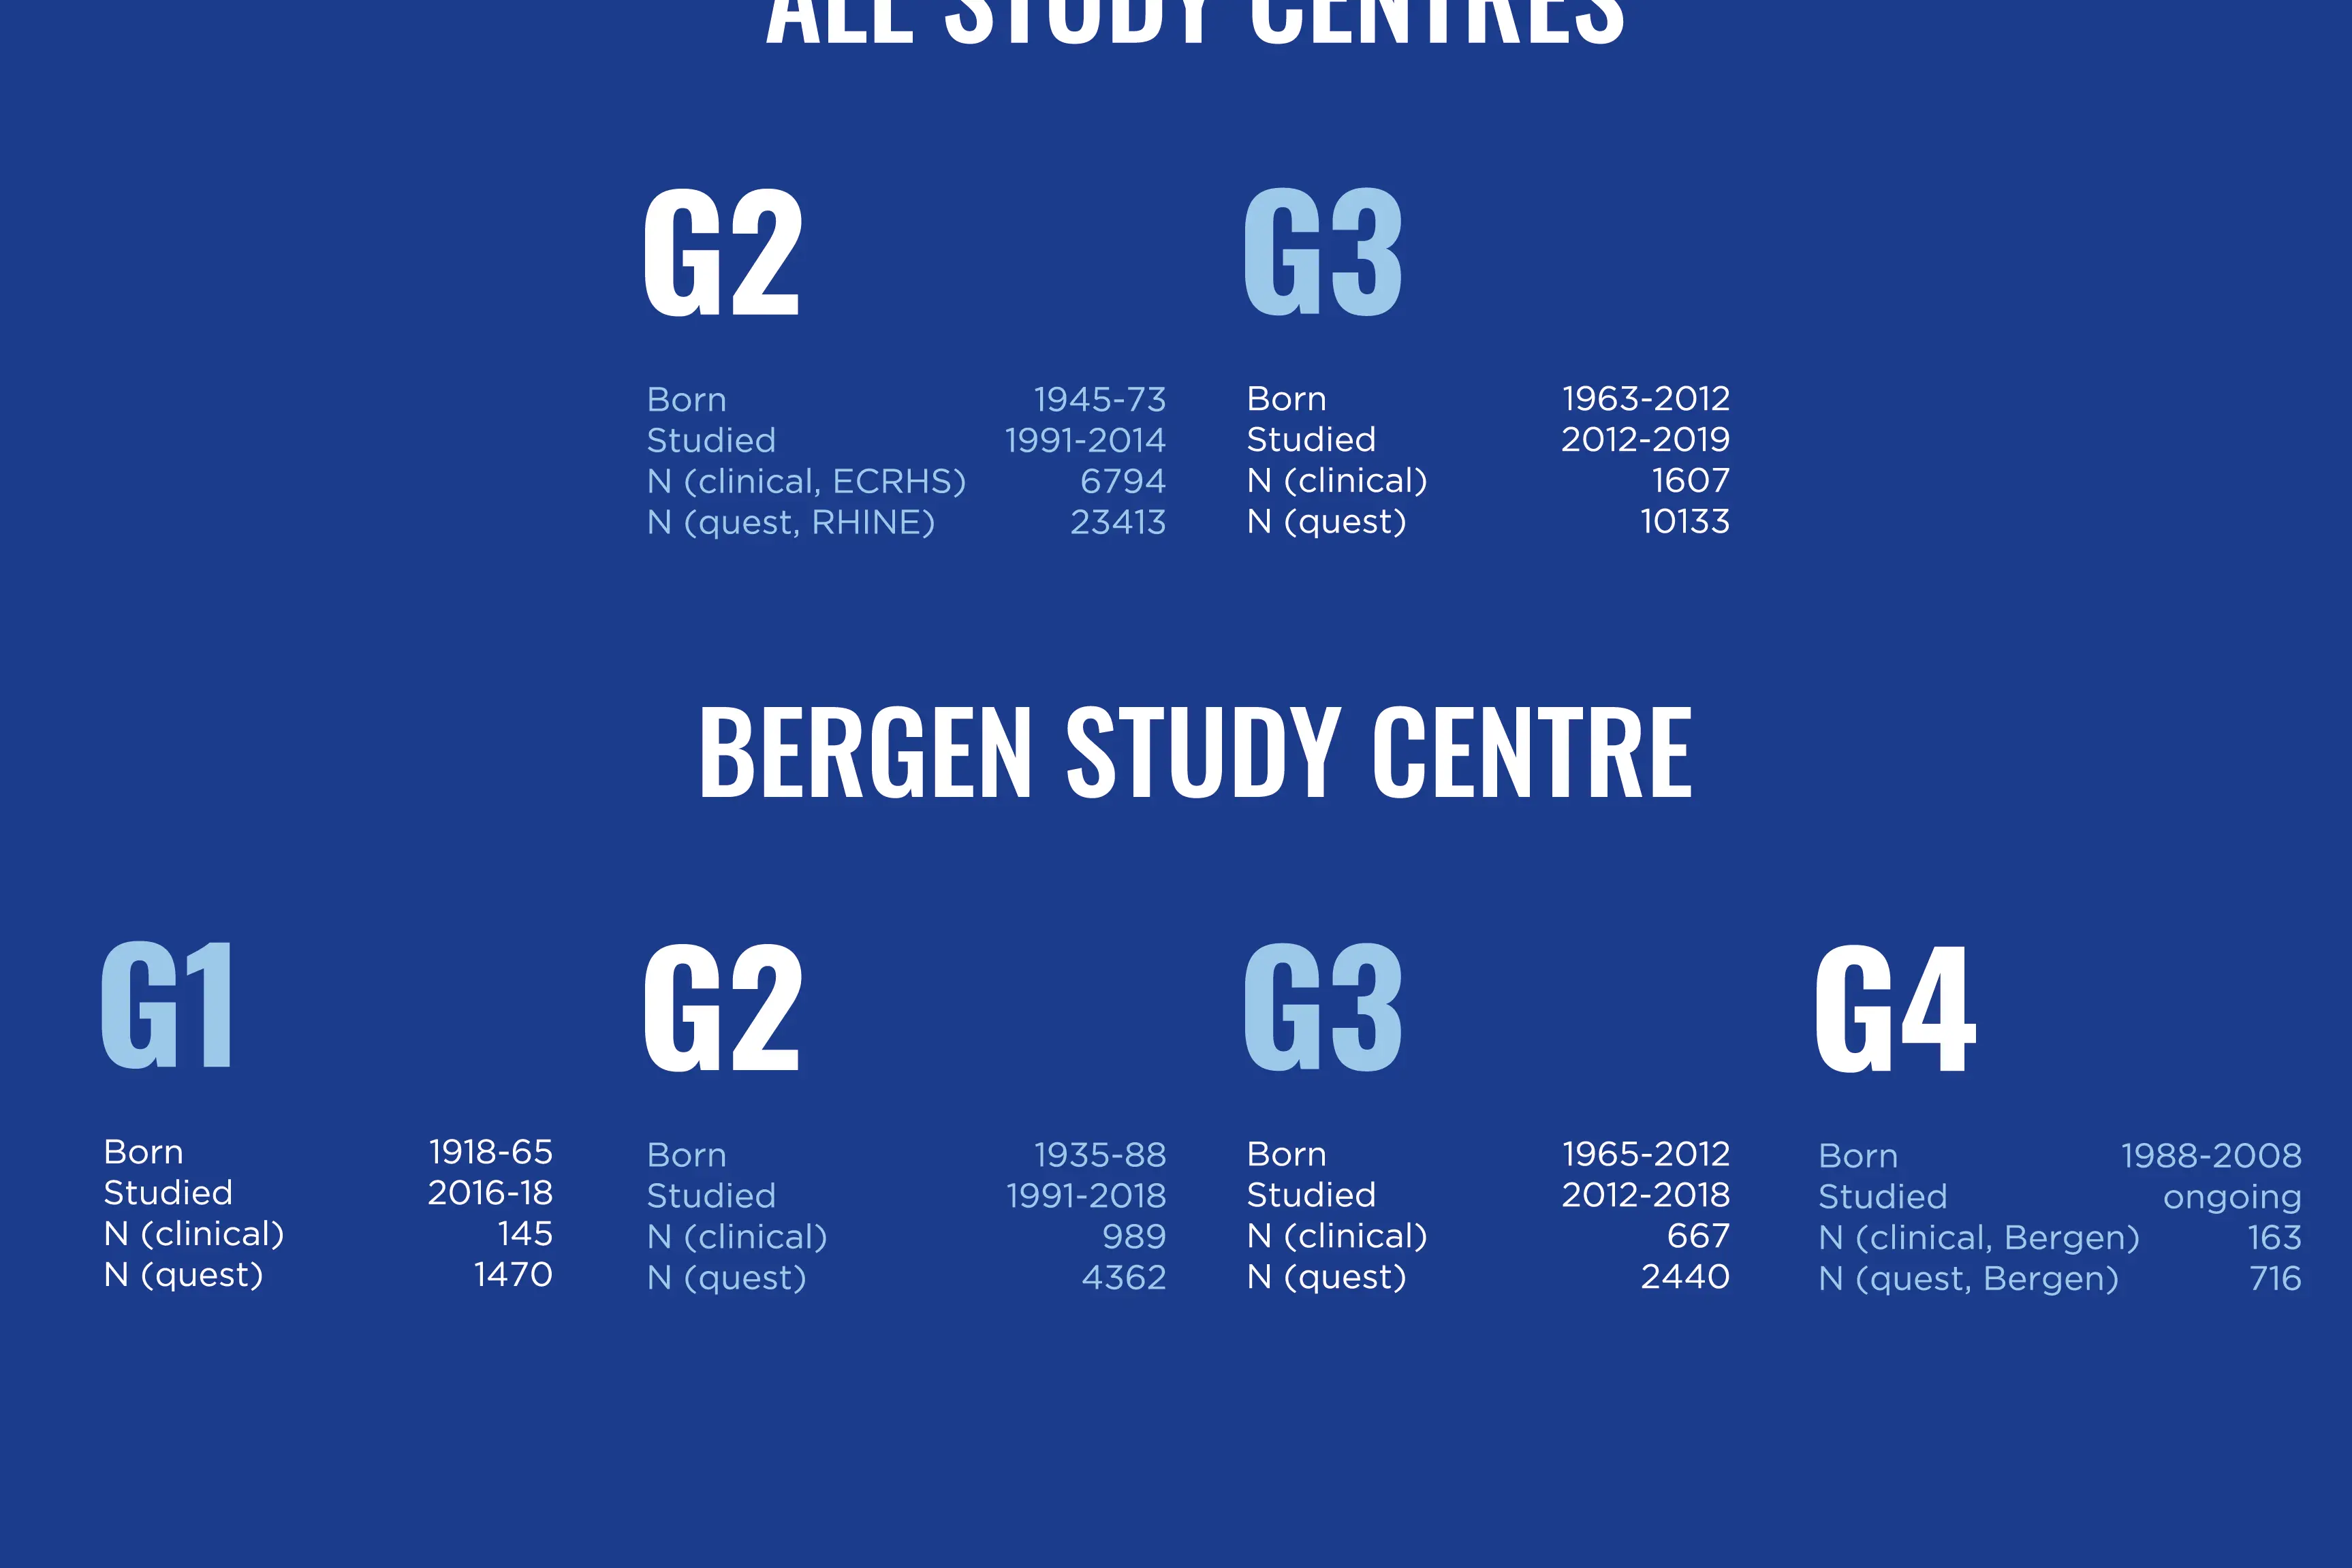 Overview over age groups in all study centres and in Bergen study centre. Graphics